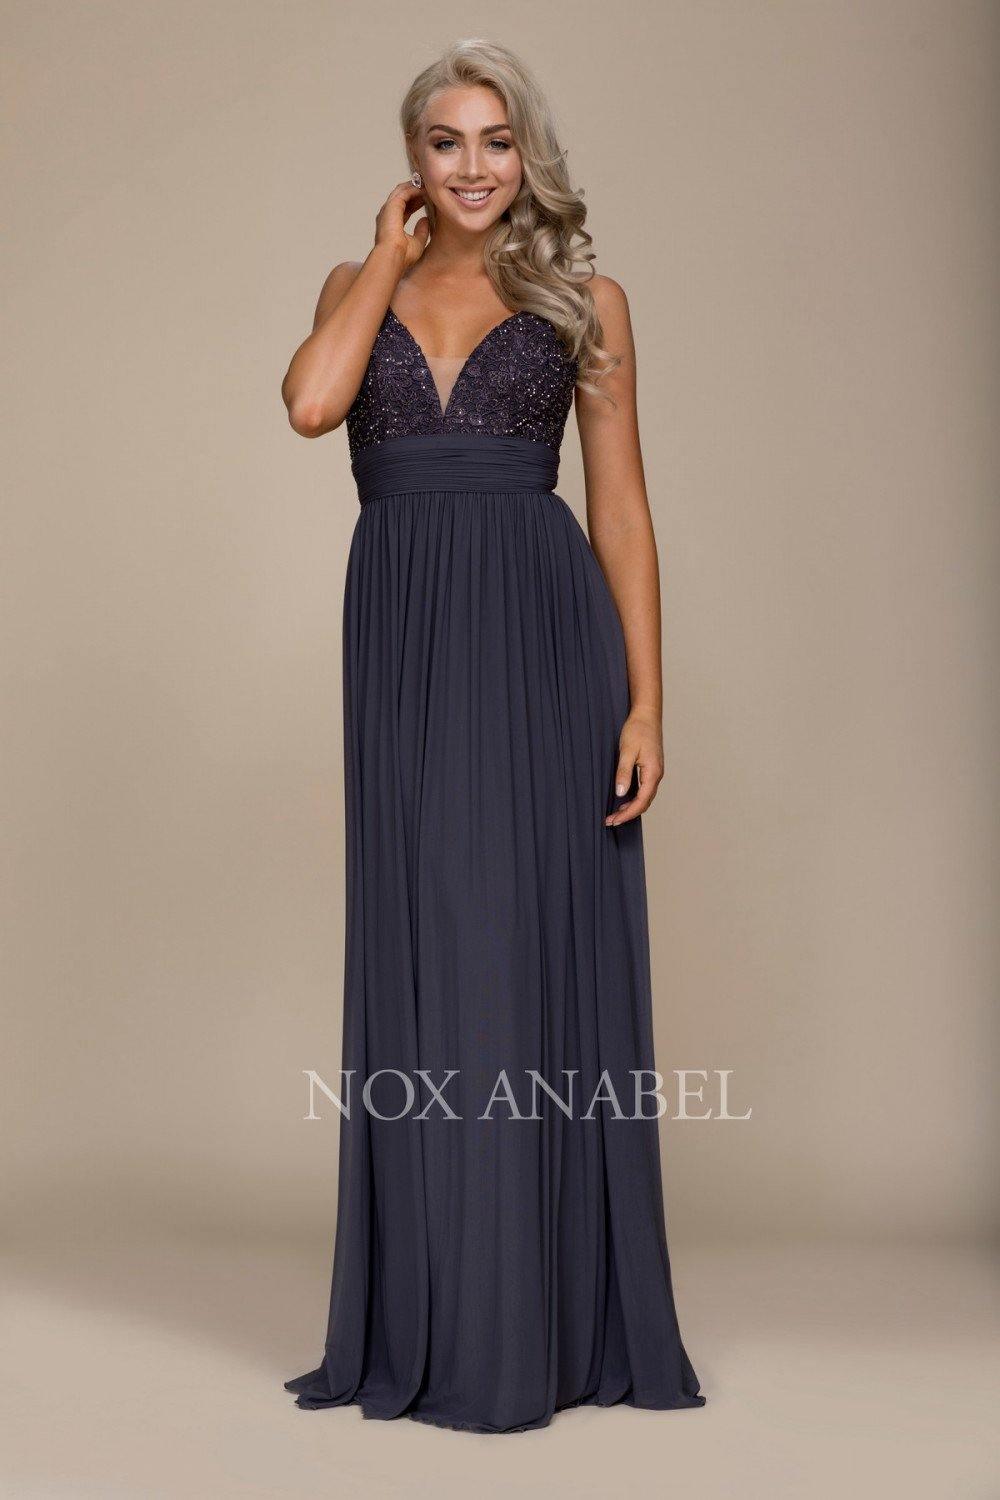 Prom Dress Formal Evening Gown Sale - The Dress Outlet